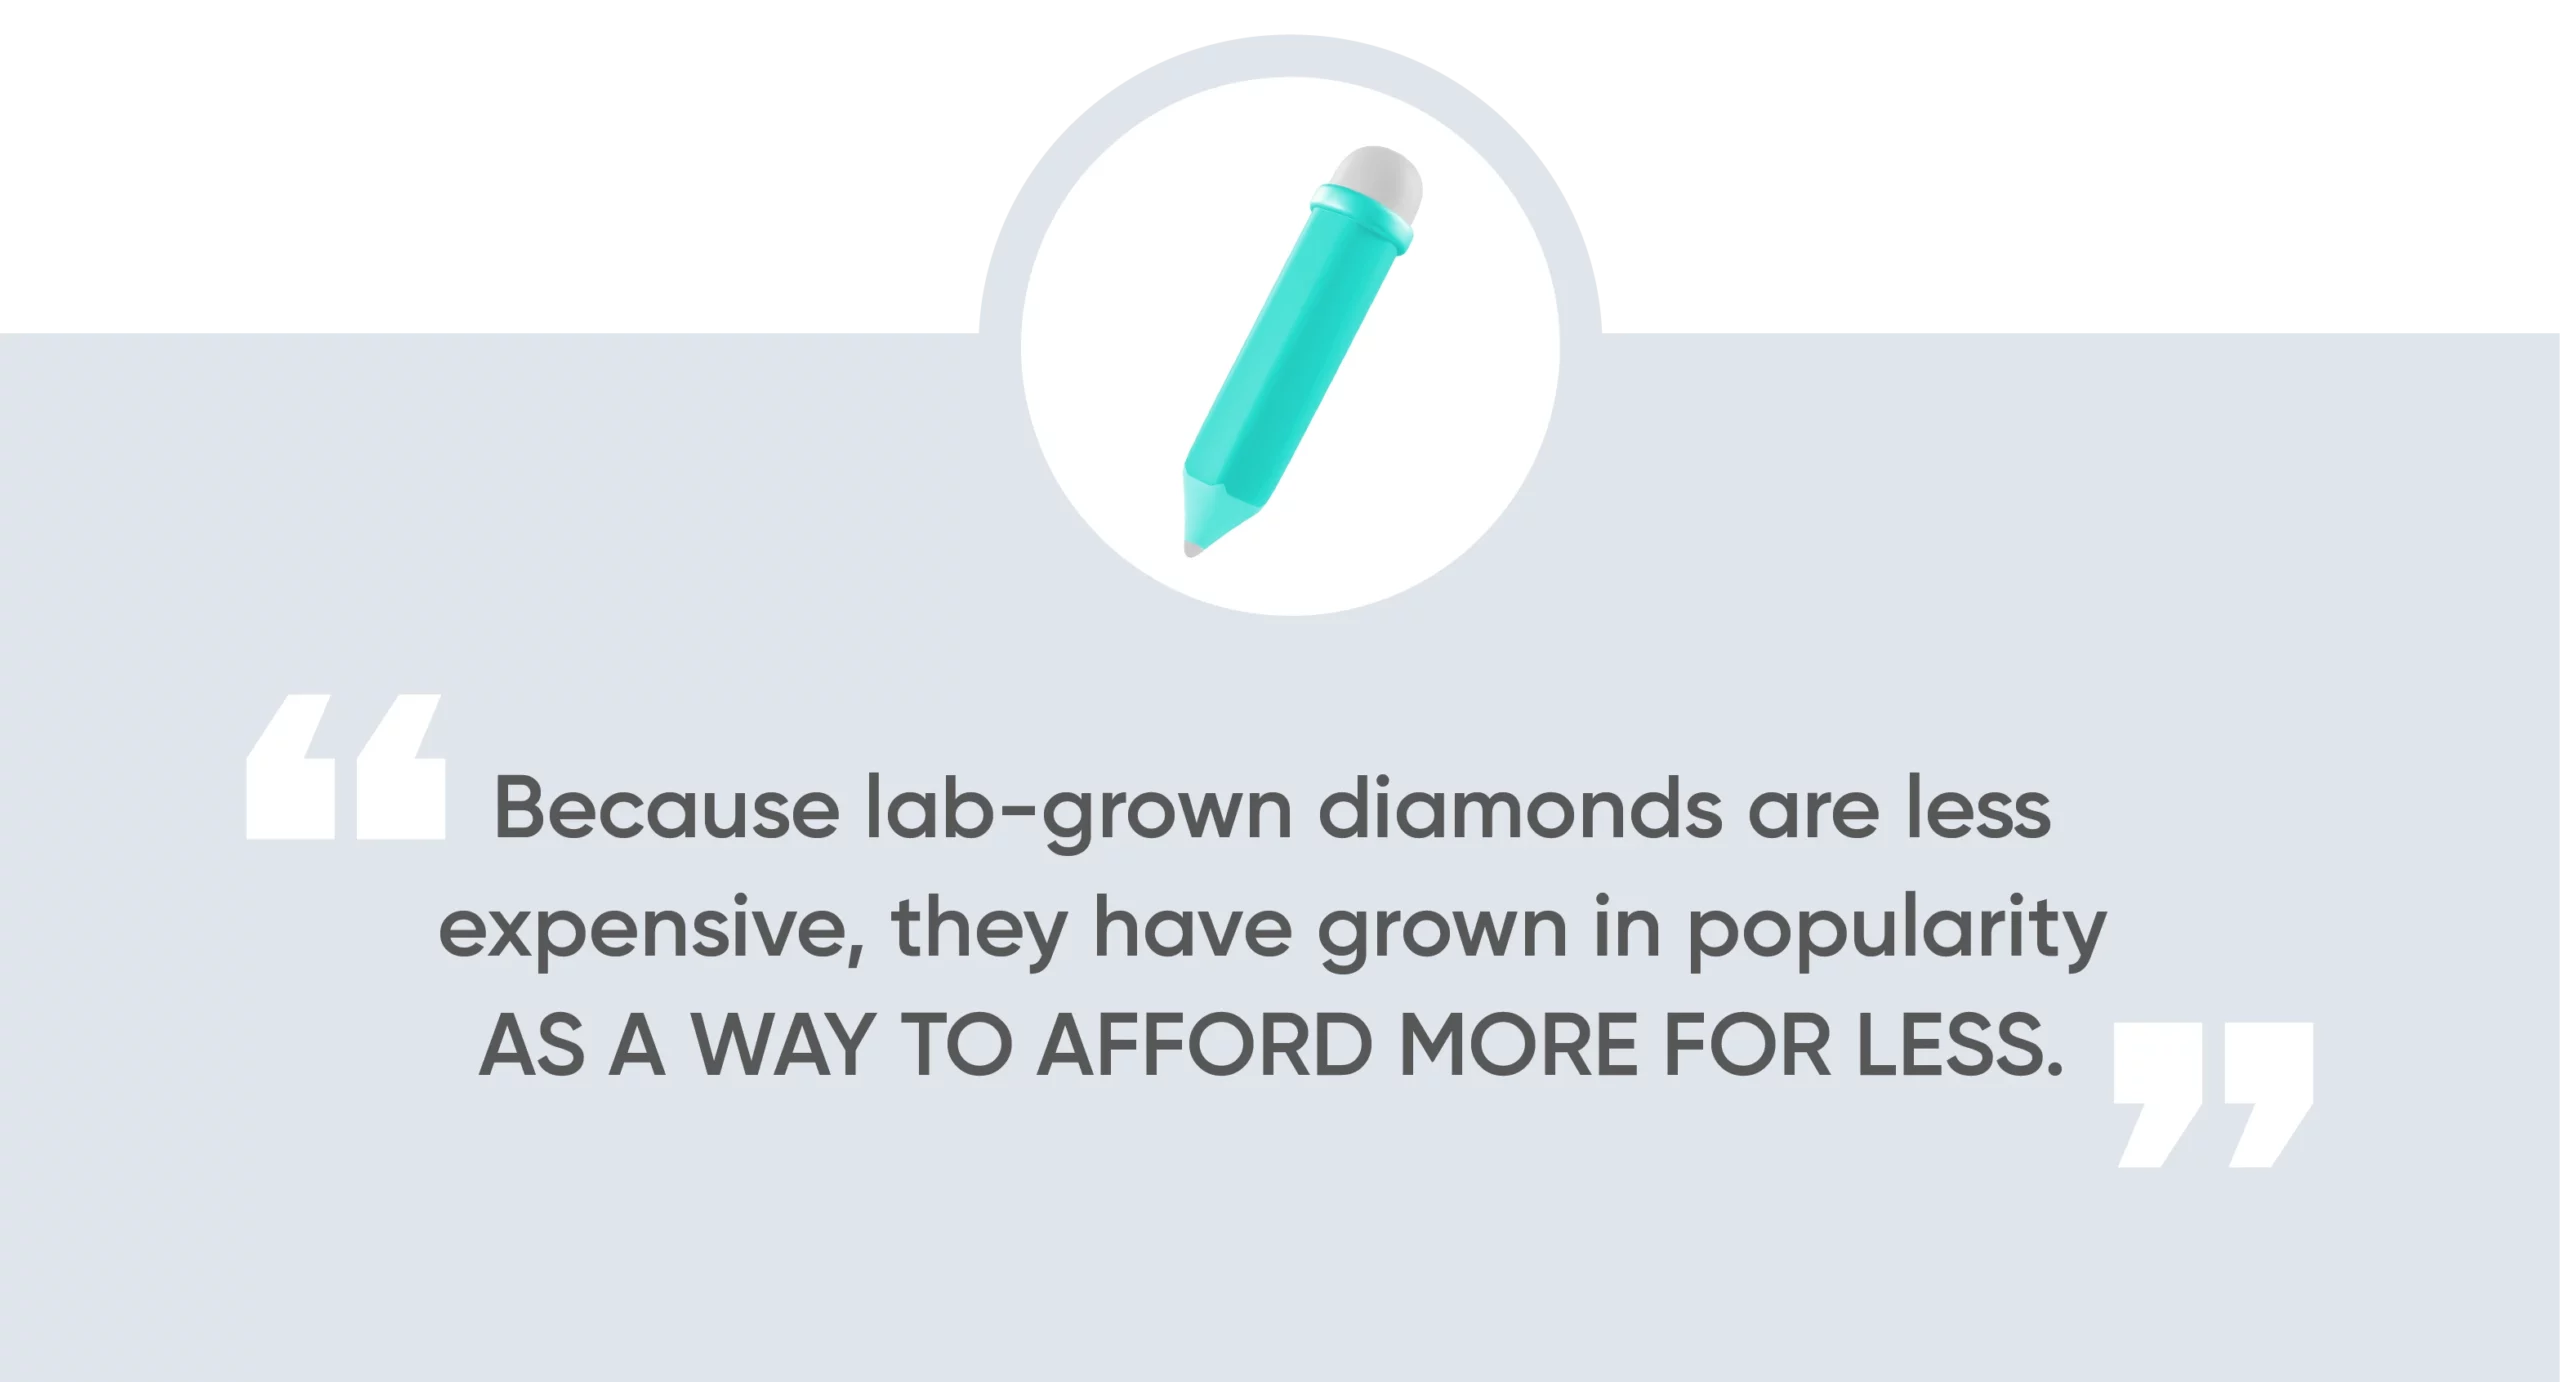 Because lab-grown diamonds are less expensive, they have grown in popularity as a way to afford more for less.